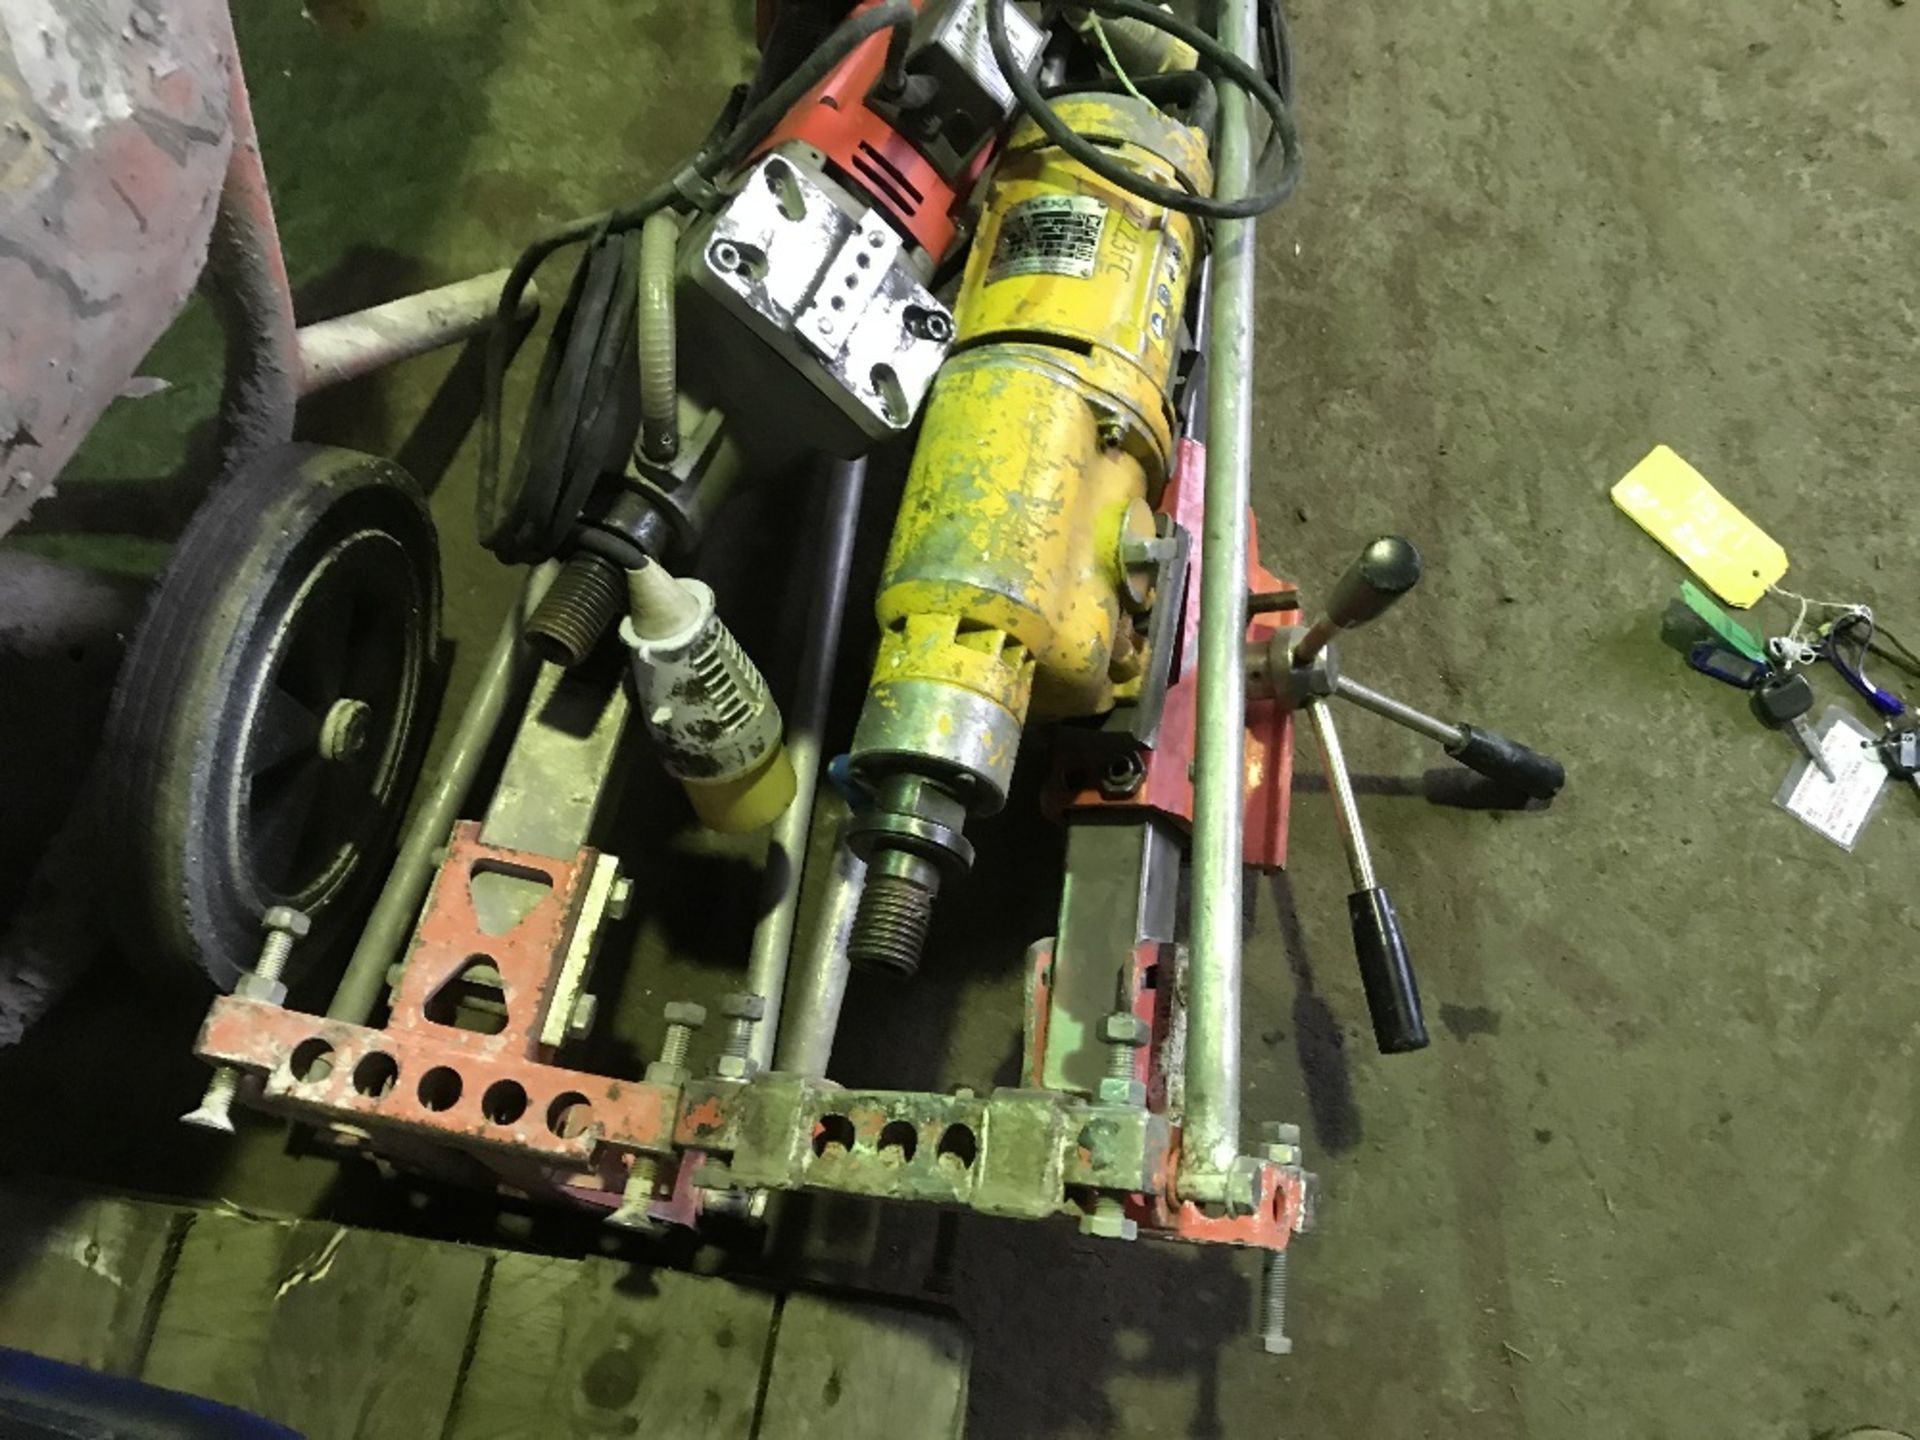 3 X DIAMOND DRILL UNITS C/W 2 X STANDS, CONDITION UNKNOWN - Image 2 of 5